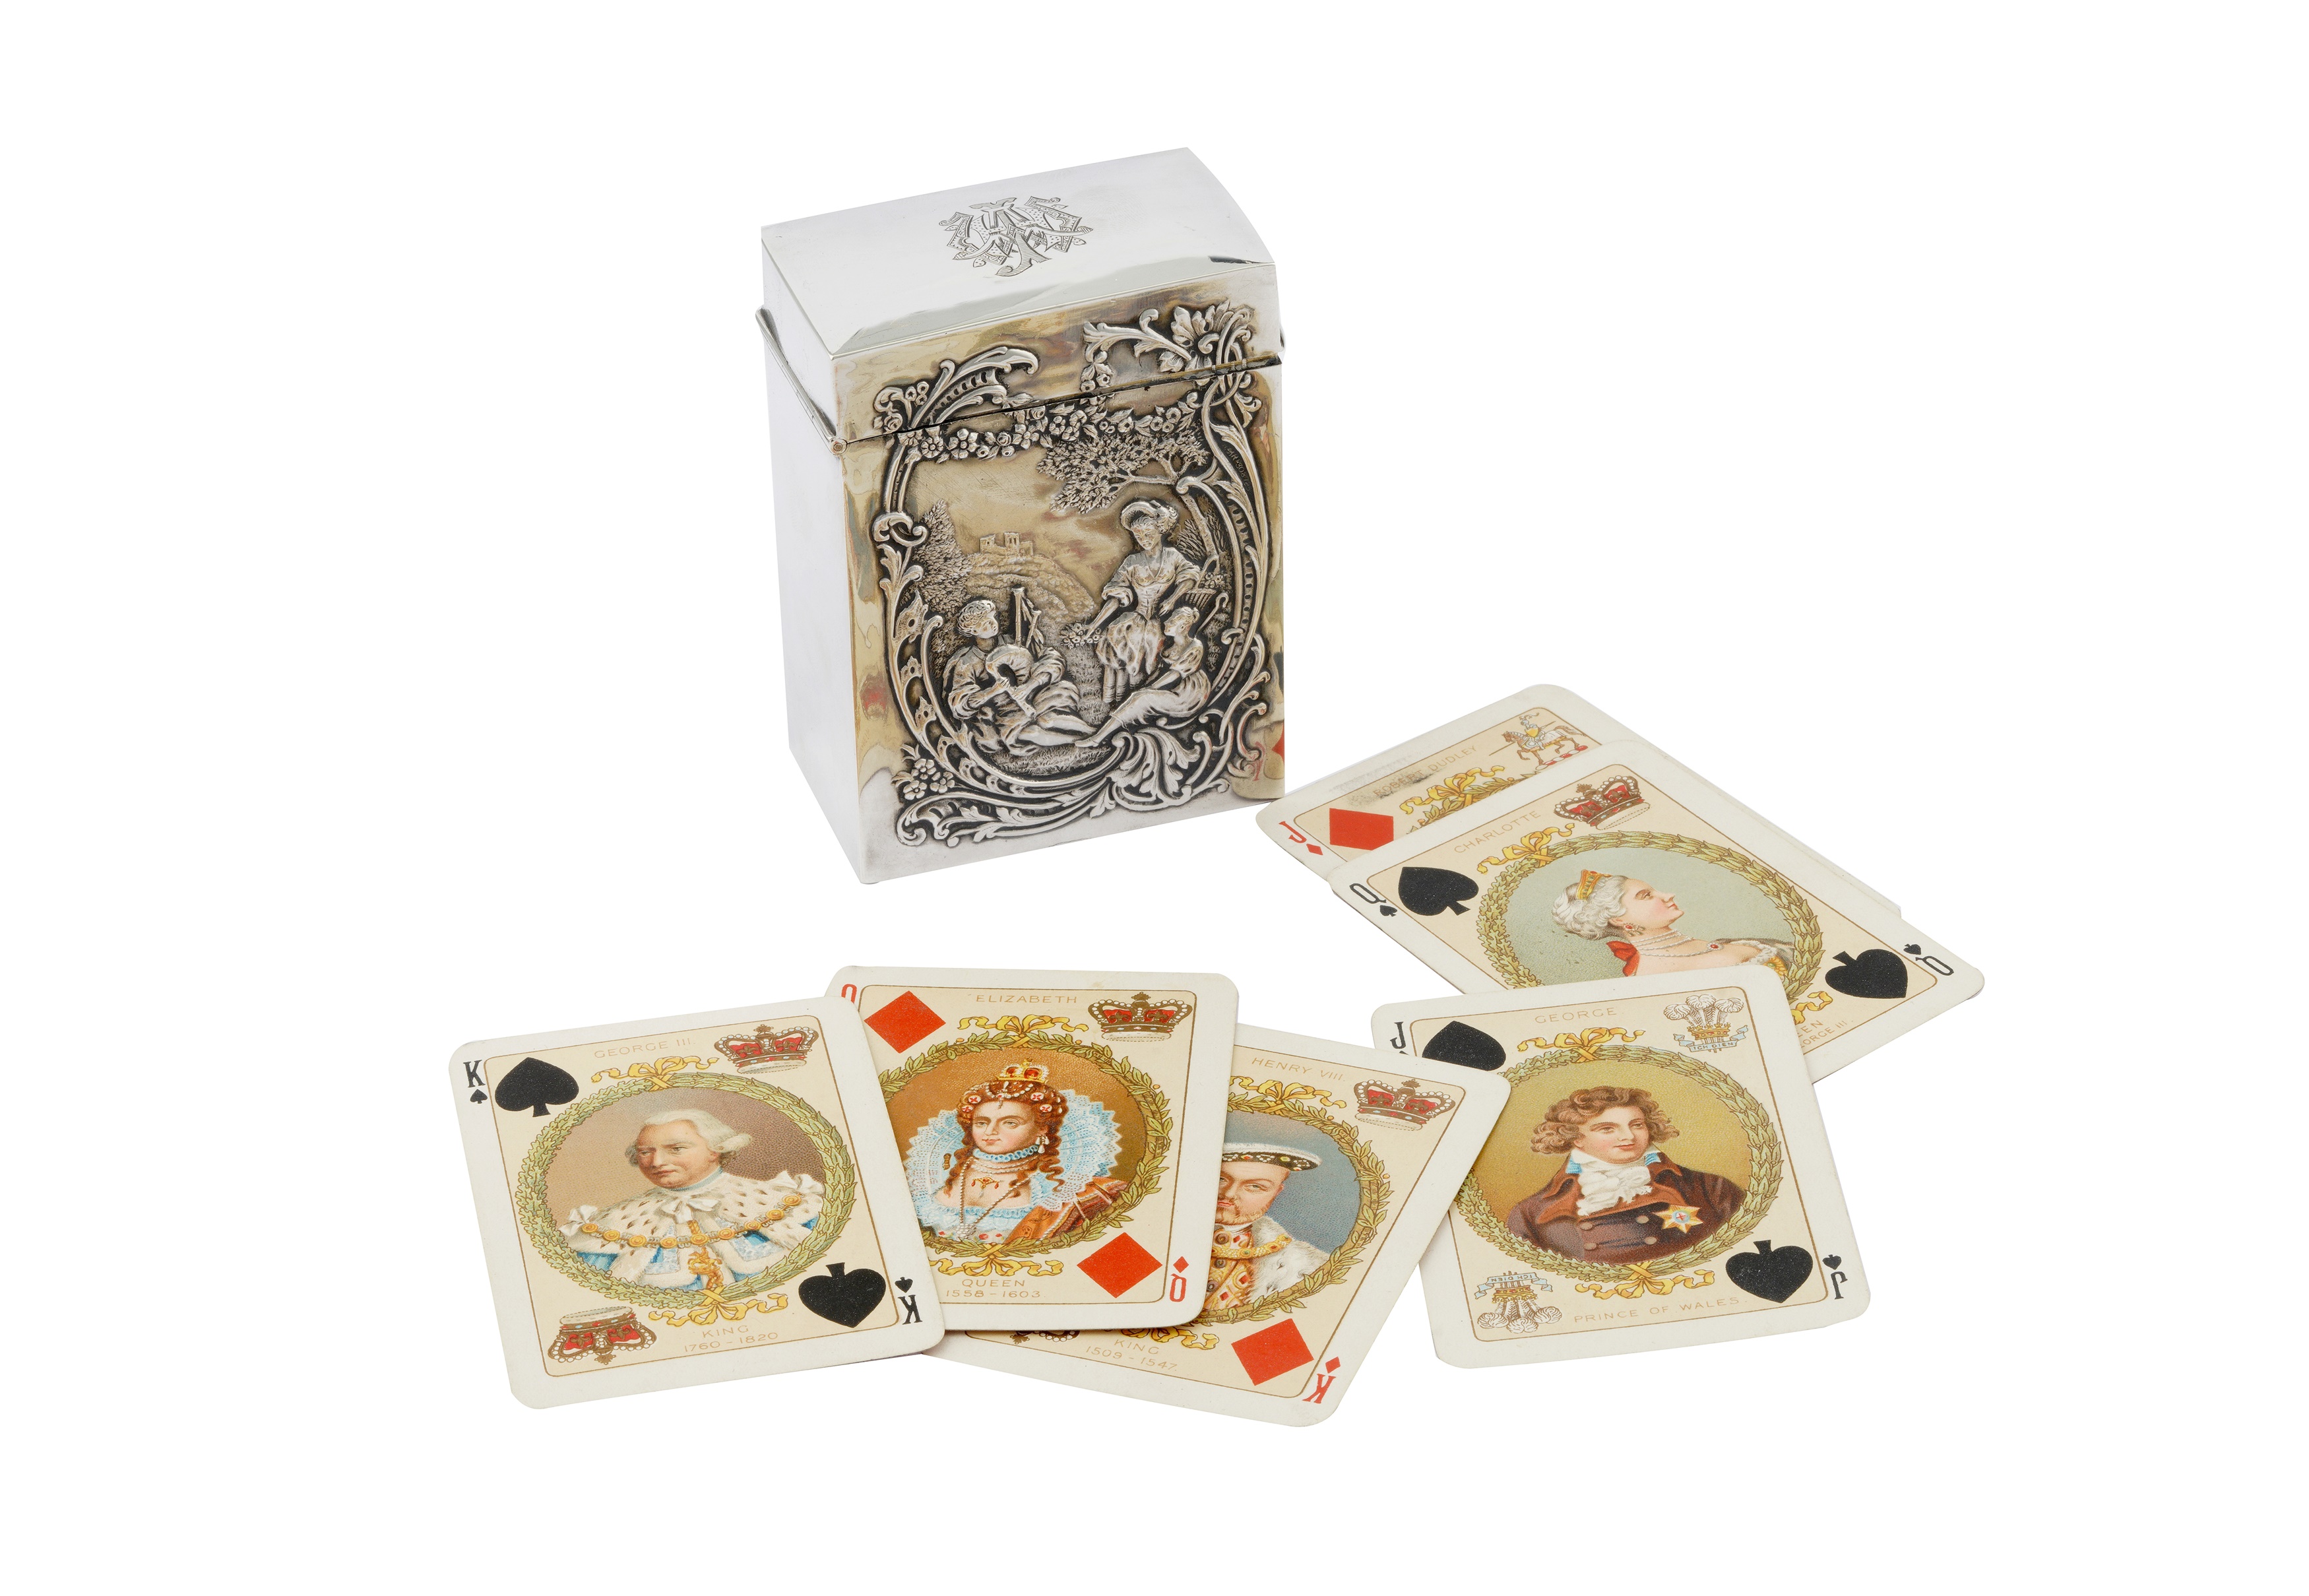 A VICTORIAN STERLING SILVER KINGS AND QUEEN OF ENGLAND PLAYING CARDS BOX, LONDON 1900 BY WILLIAM